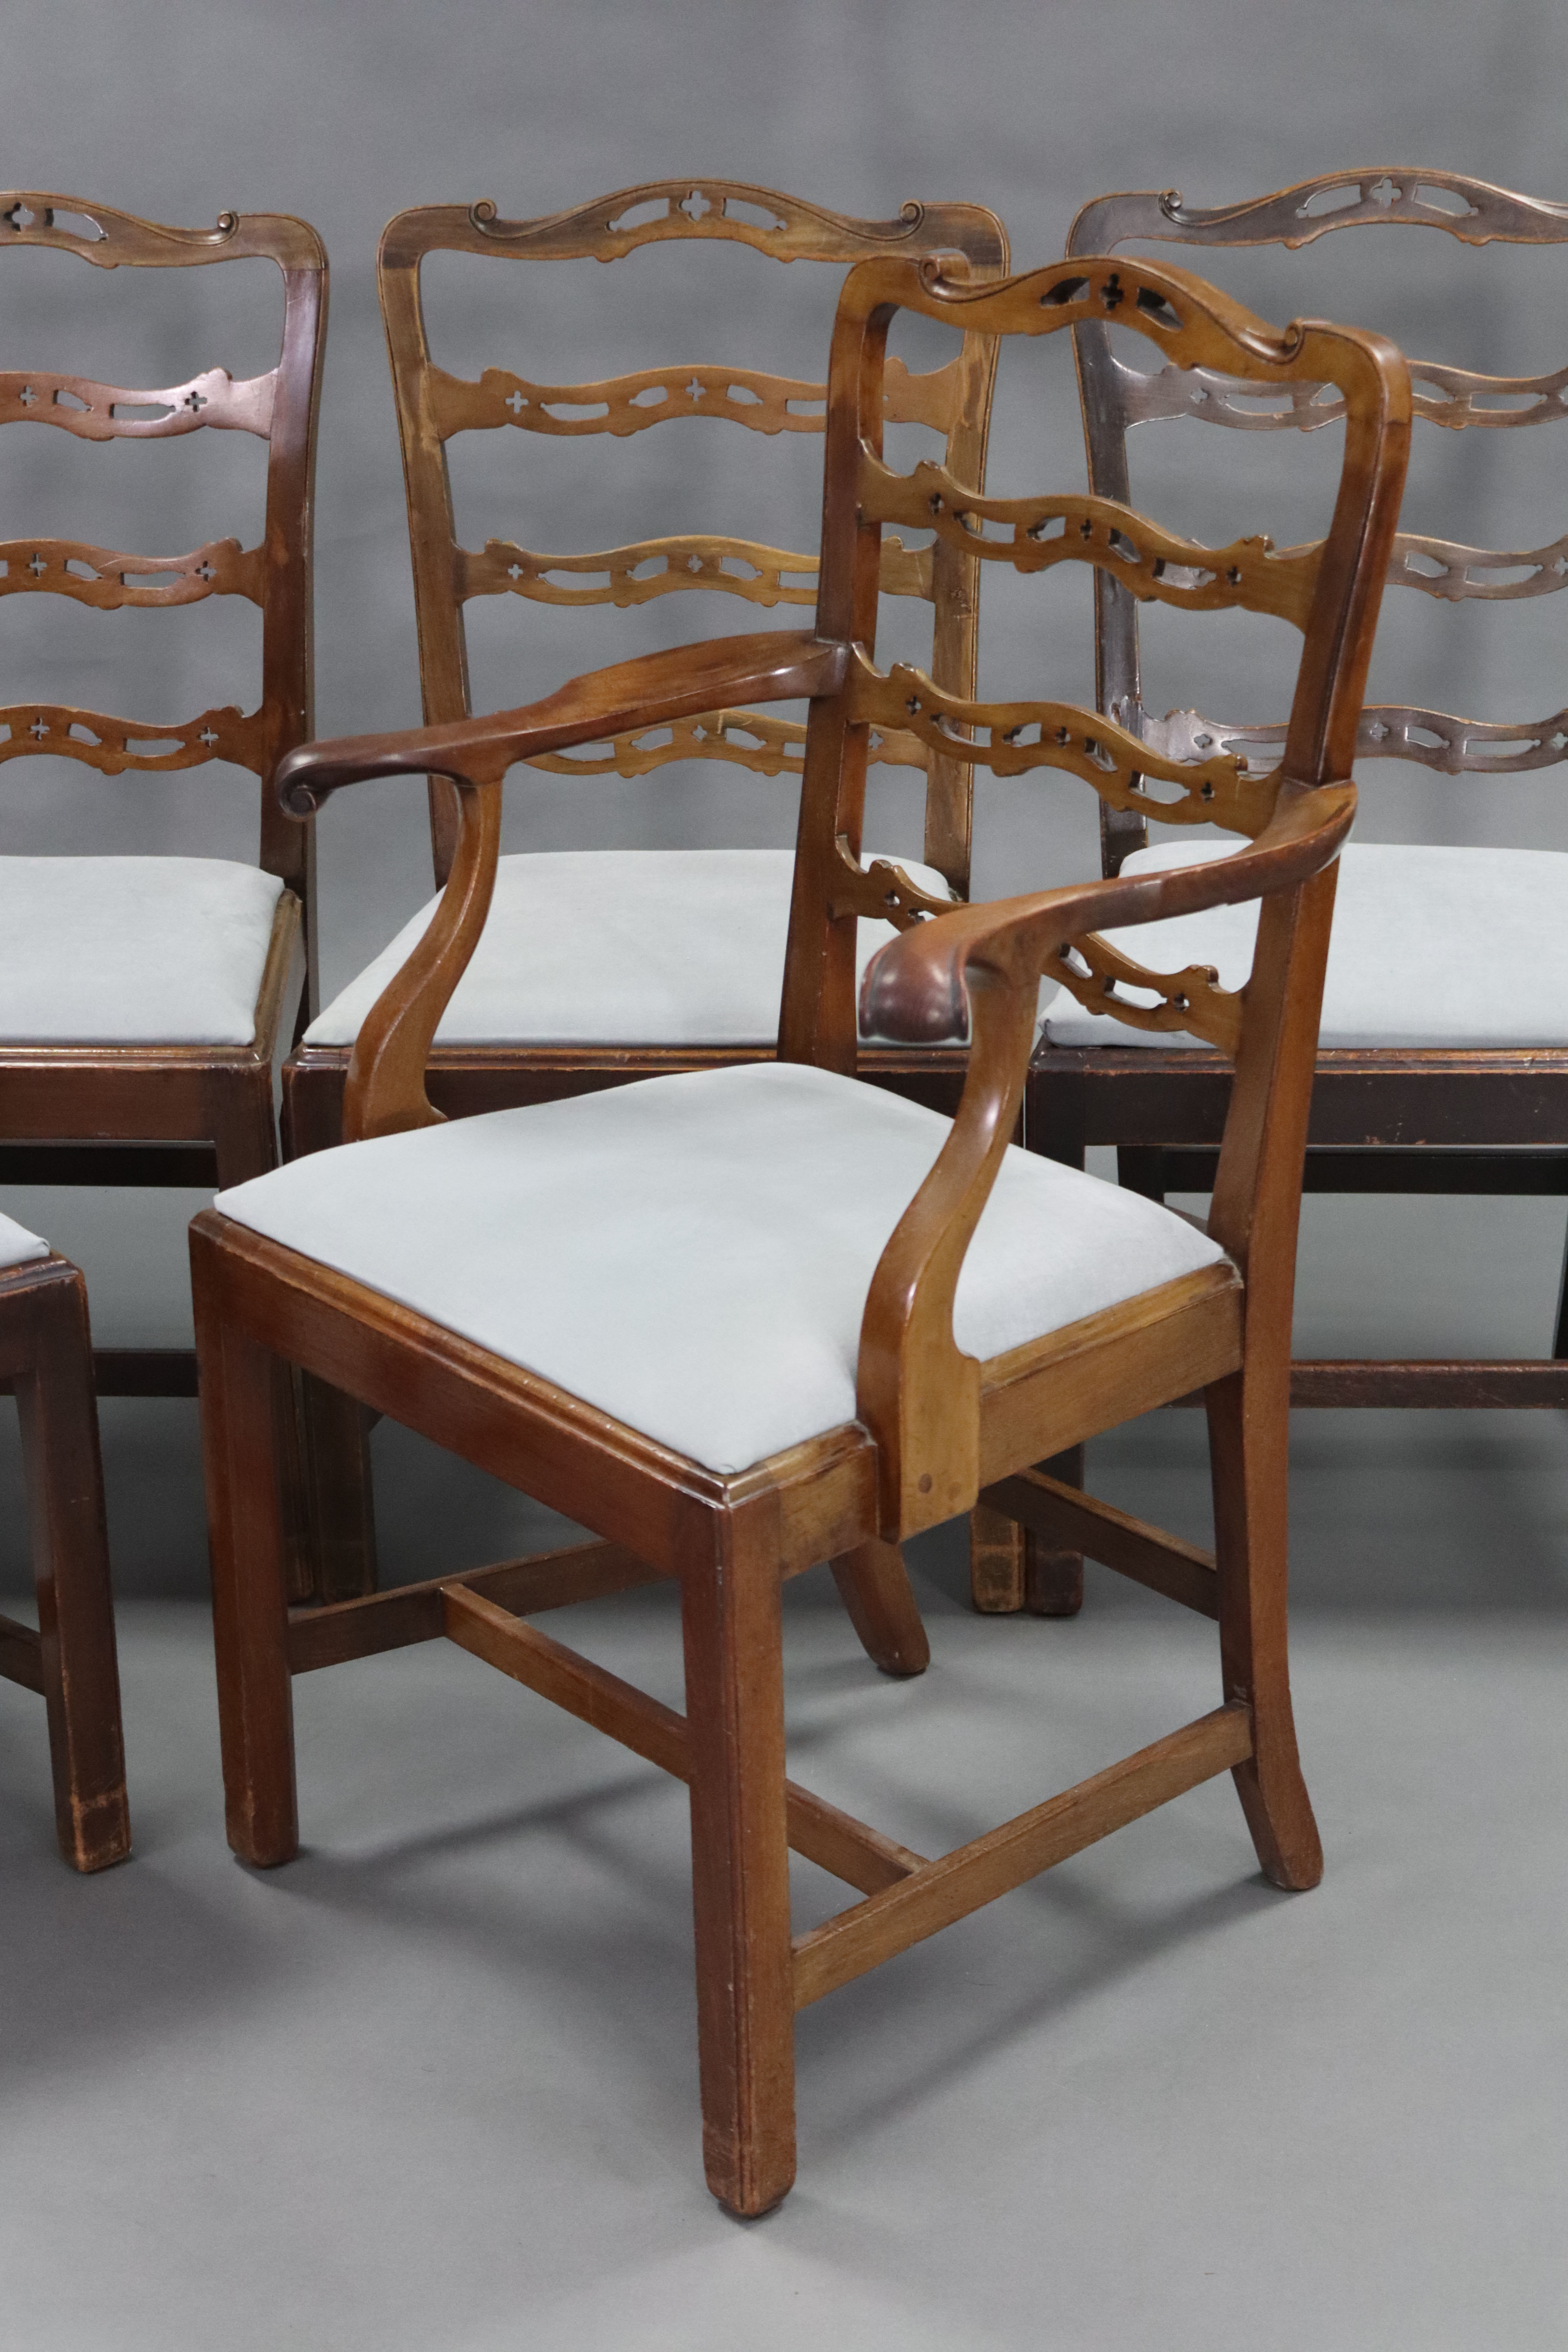 A set of six 18th century-style mahogany dining chairs, including an elbow chair, each with - Image 2 of 3